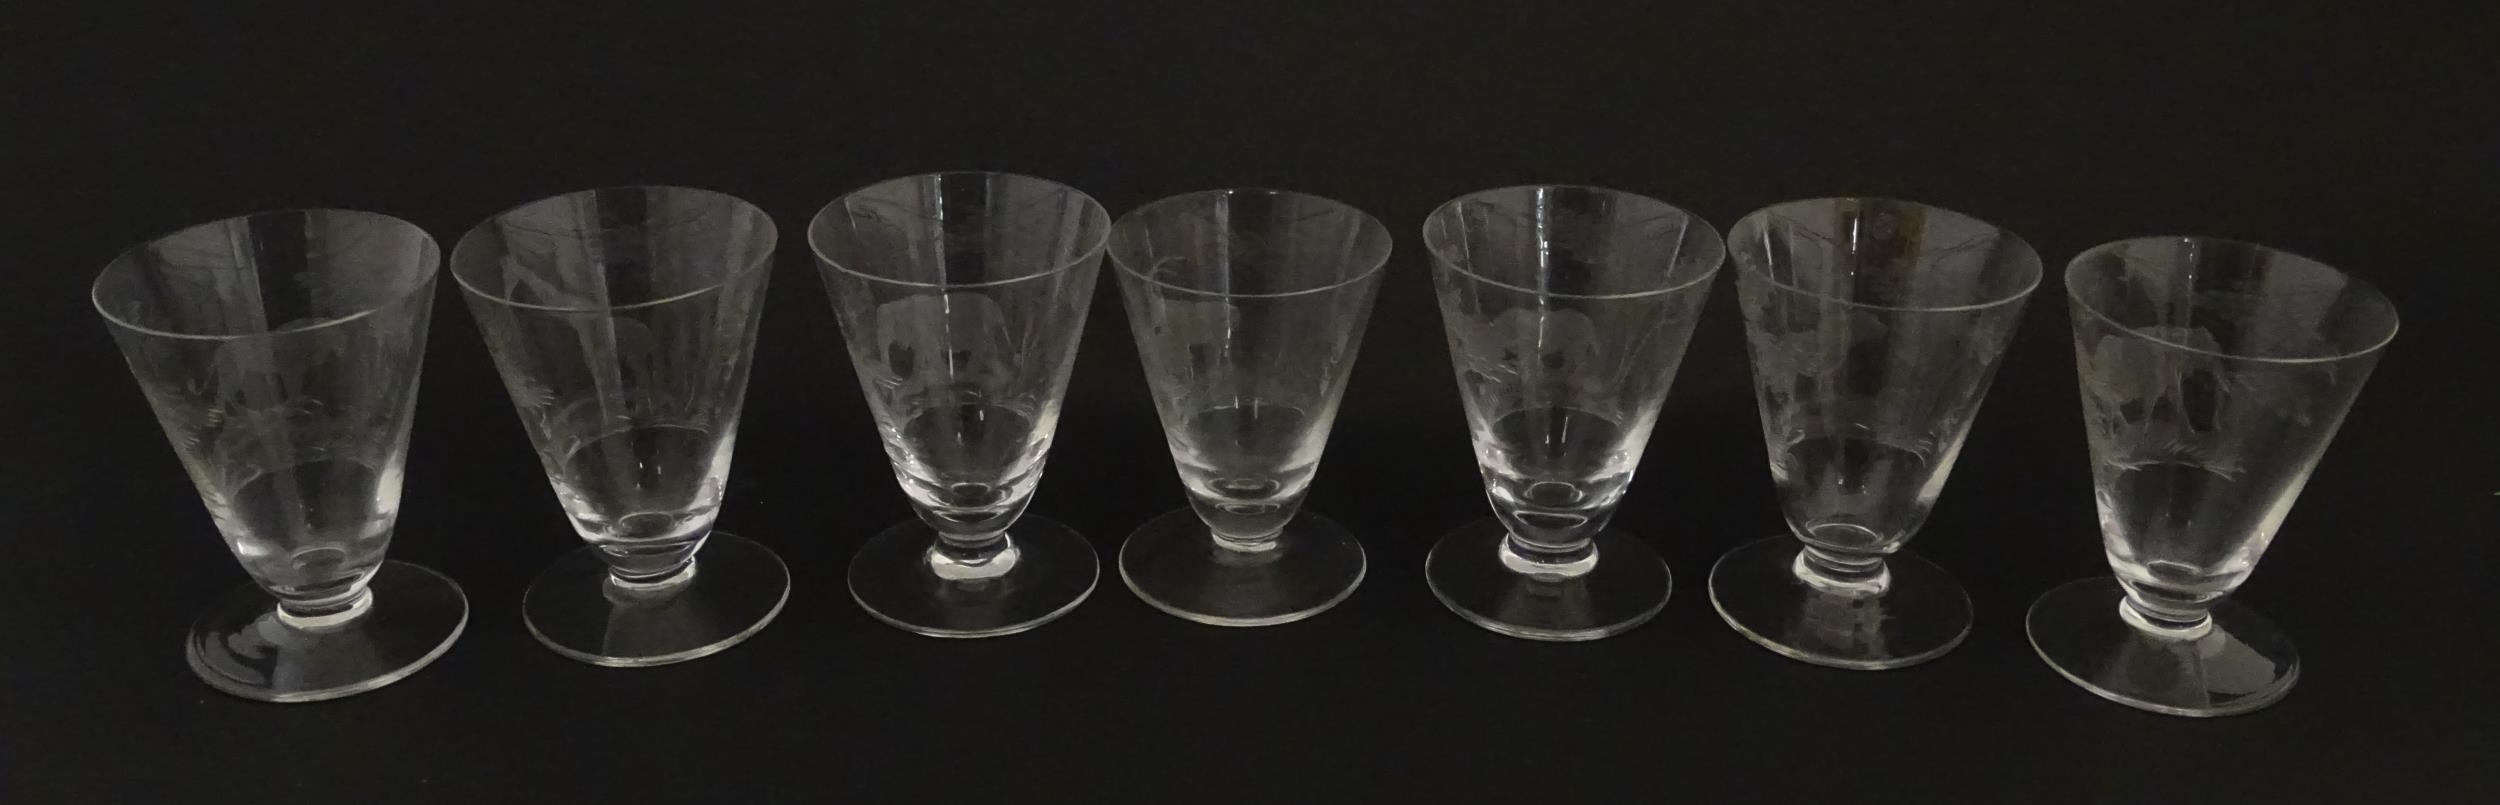 Rowland Ward sherry / liquor glasses with engraved Safari animal detail. Unsigned. Largest approx. - Image 15 of 26